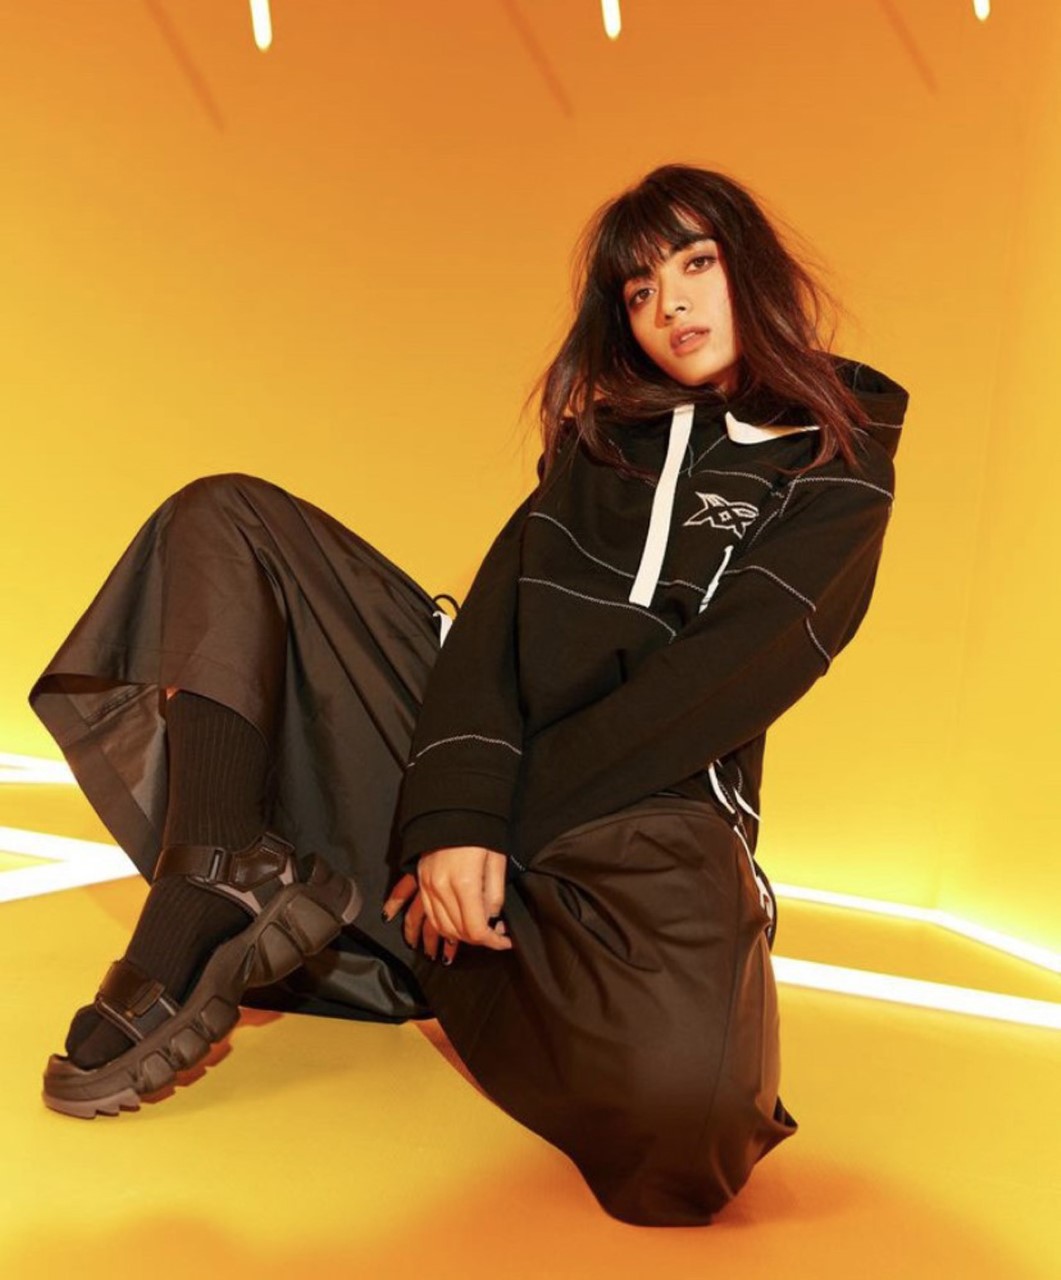 Rashmika Mandanna rocks some major athleisure goals with her stylish look as she presents Onitsuka Tiger's Spring-Summer '23 collection